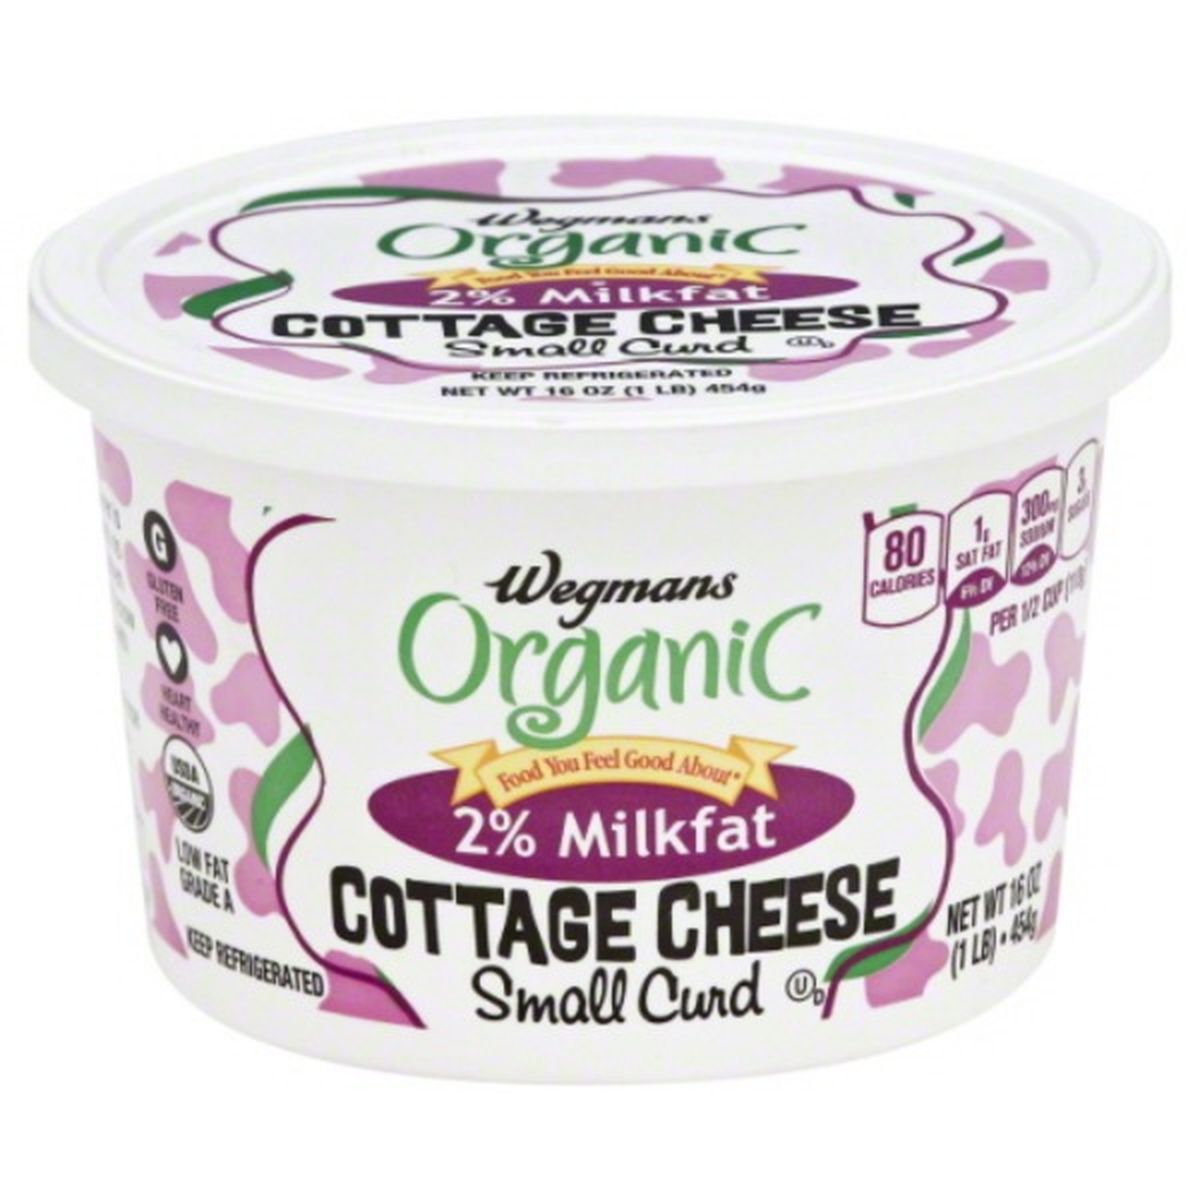 Calories in Wegmans Organic 2% Milkfat Cottage Cheese, Small Curd